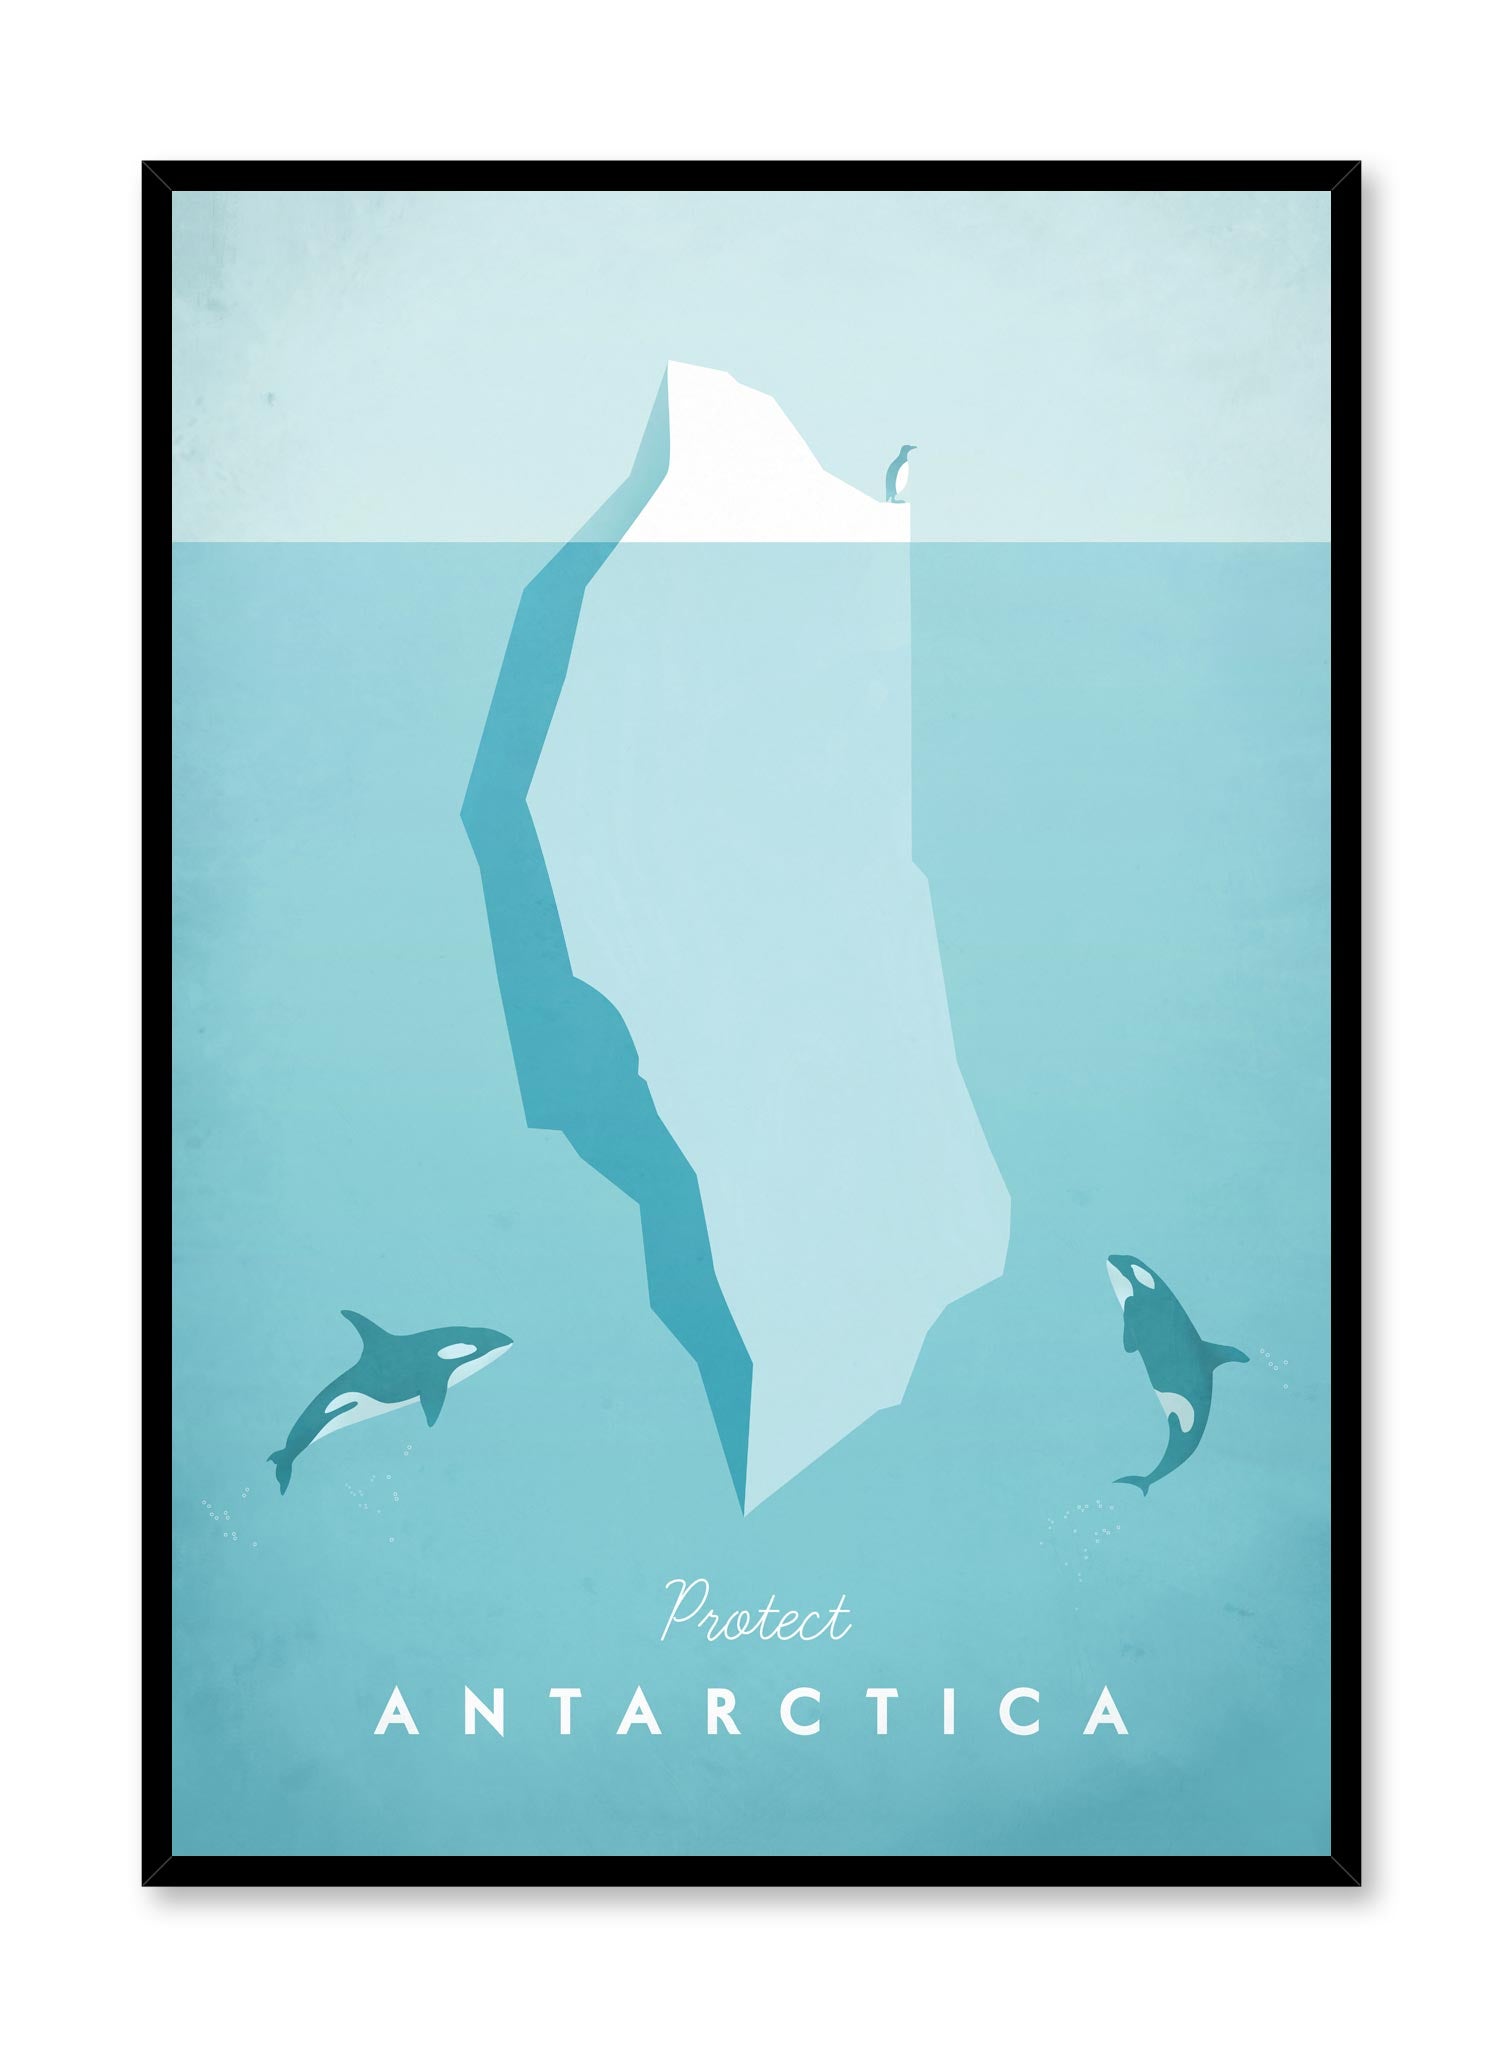 Modern minimalist travel poster by Opposite Wall with illustration of Antarctica